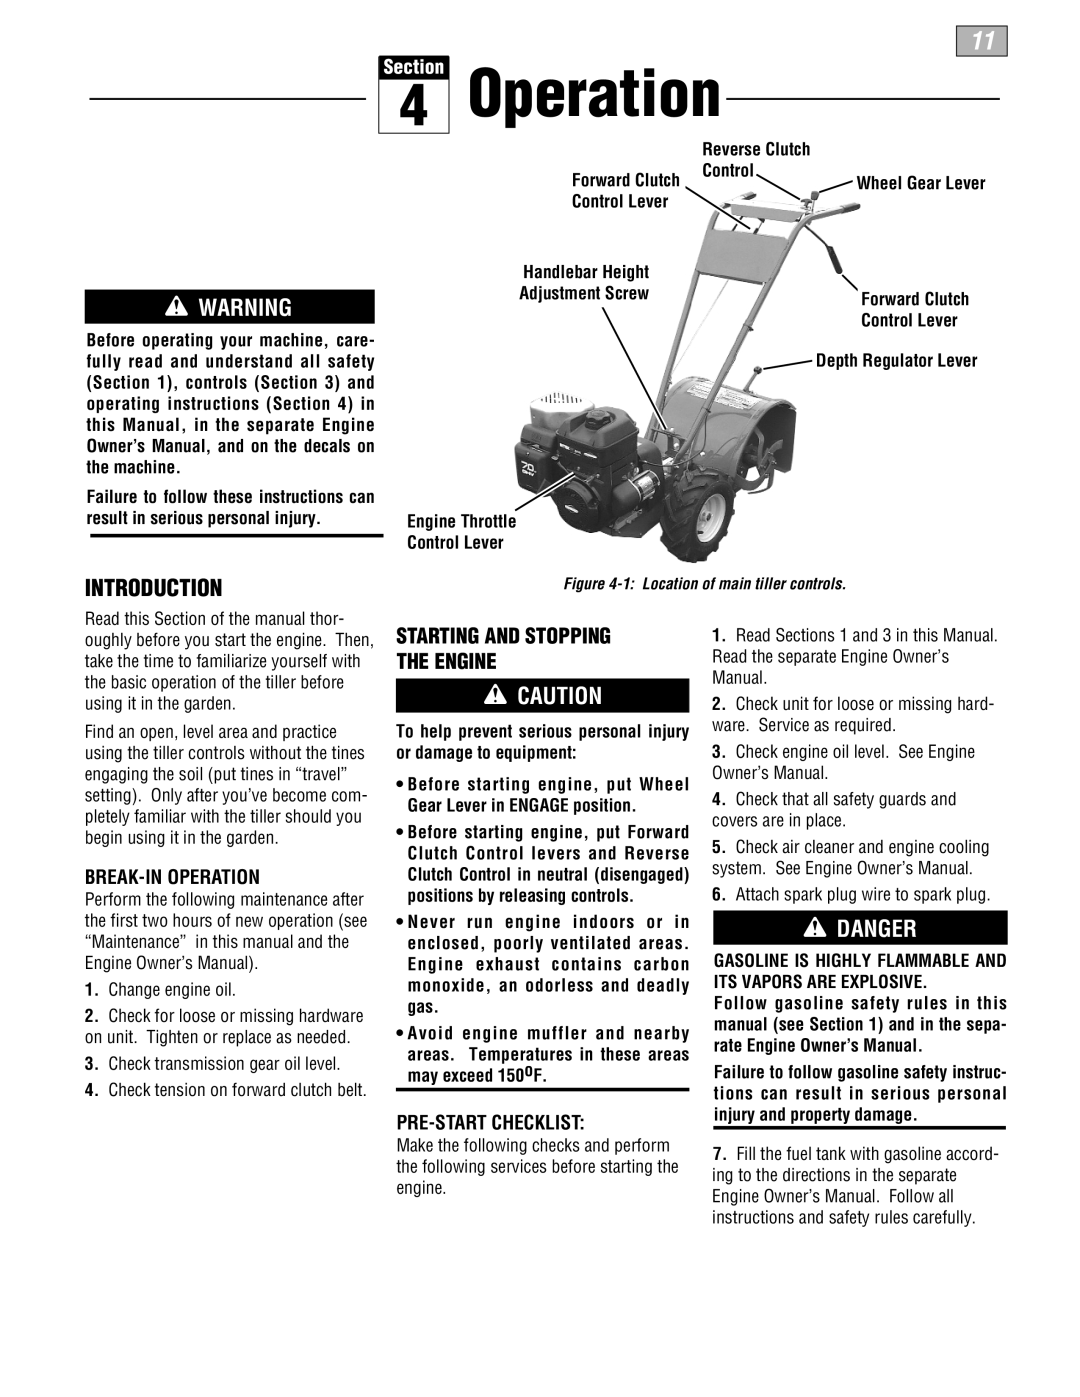 Troy-Bilt 664D-Pony Starting And Stopping The Engine, Break-In Operation, Pre-Start Checklist, Reverse Clutch, Control 